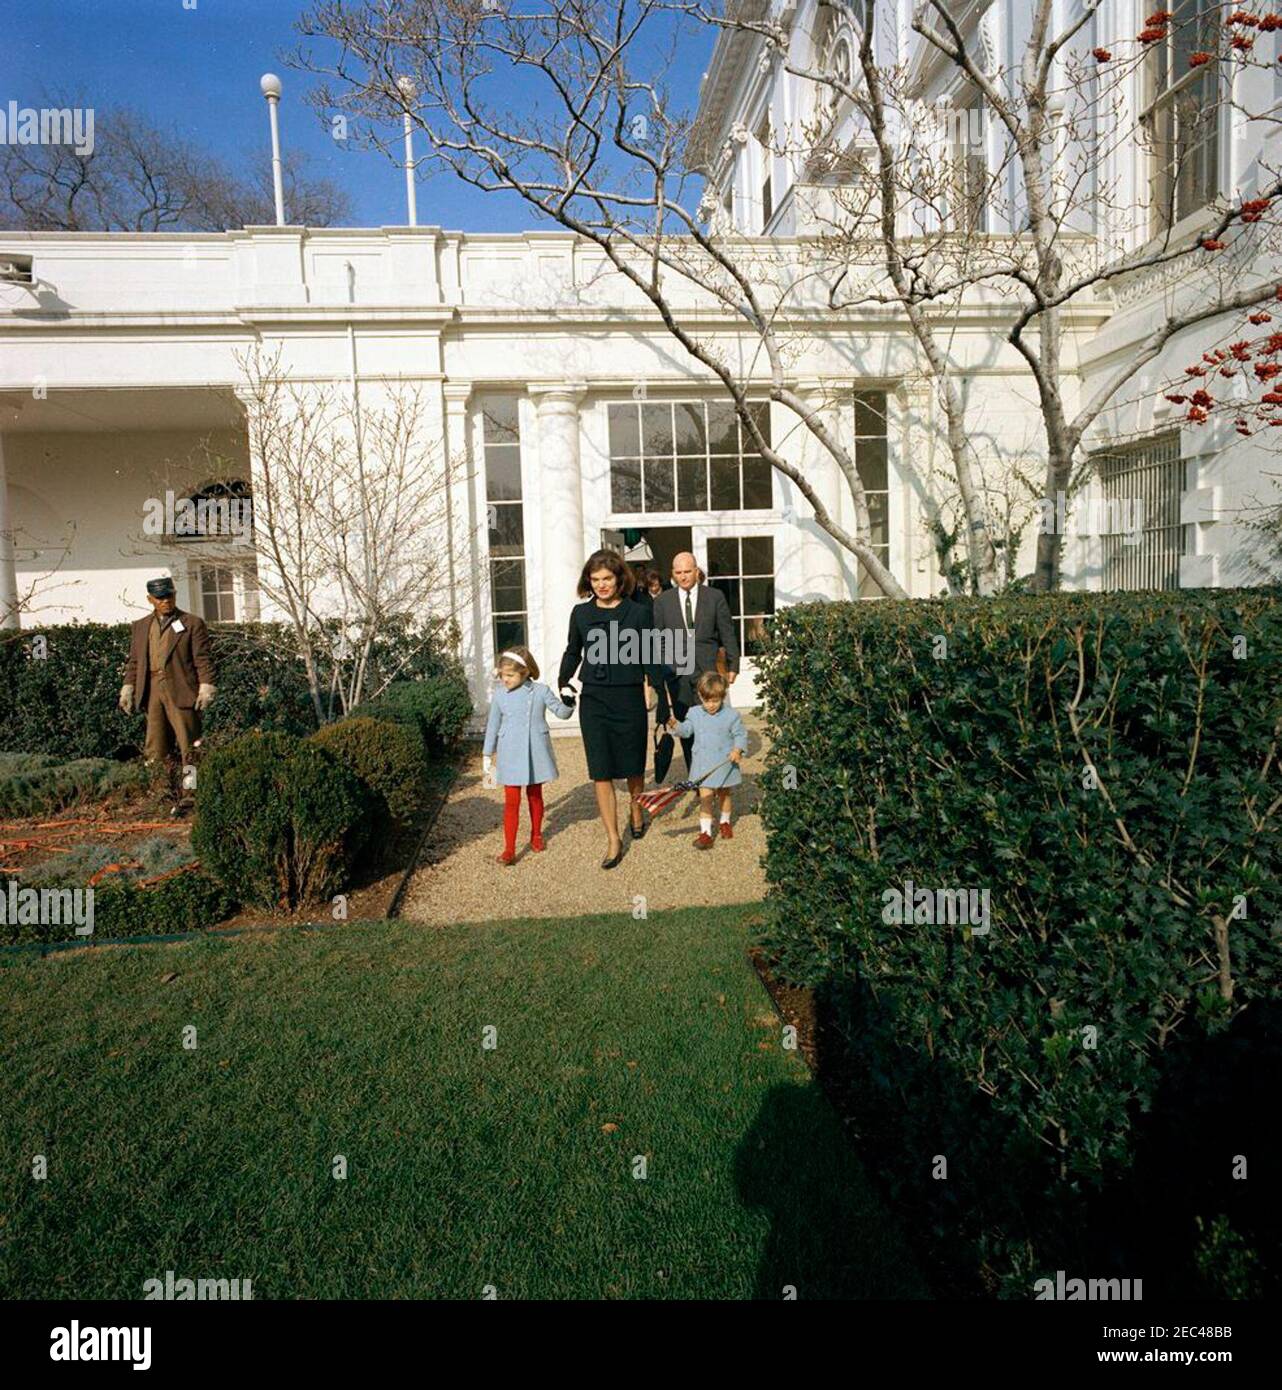 Jacqueline Kennedy (JBK) departs White House. Former first lady, Jacqueline Kennedy, and her children, Caroline Kennedy and John F. Kennedy, Jr., depart the White House for the last time. Special Assistant to President John F. Kennedy, Dave Powers, follows behind; Princess Lee Radziwill of Poland (sister of Mrs. Kennedy) walks through the Palm Room door. Rose Garden, White House, Washington, D.C. Stock Photo